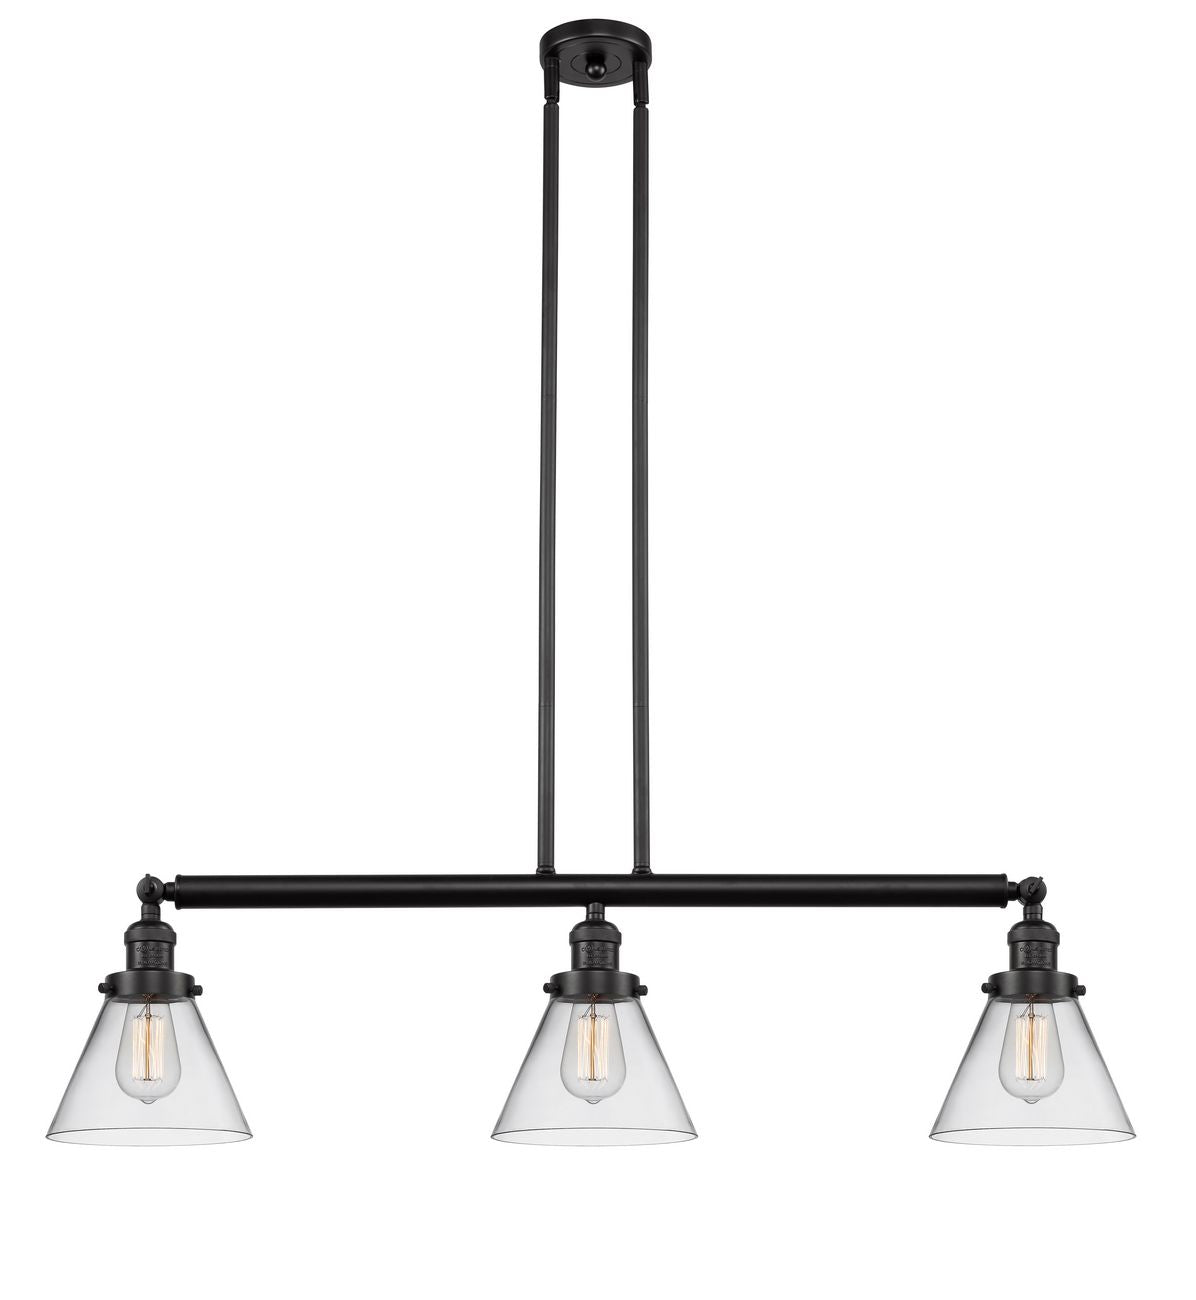 213-OB-G42 3-Light 40.25" Oil Rubbed Bronze Island Light - Clear Large Cone Glass - LED Bulb - Dimmensions: 40.25 x 7.75 x 10<br>Minimum Height : 20.25<br>Maximum Height : 44.25 - Sloped Ceiling Compatible: Yes